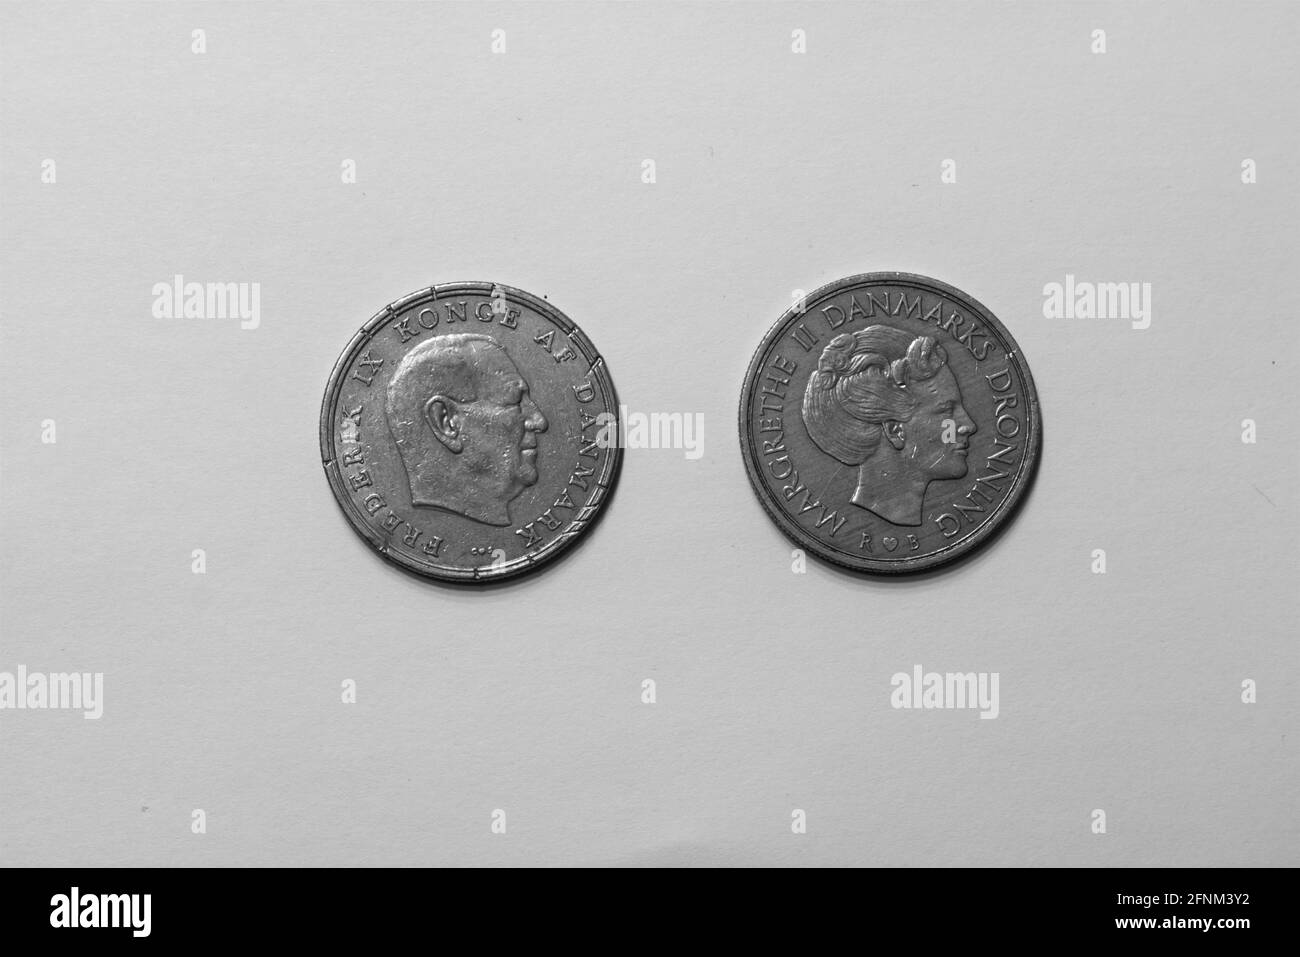 black and white of coins from denmark Stock Photo